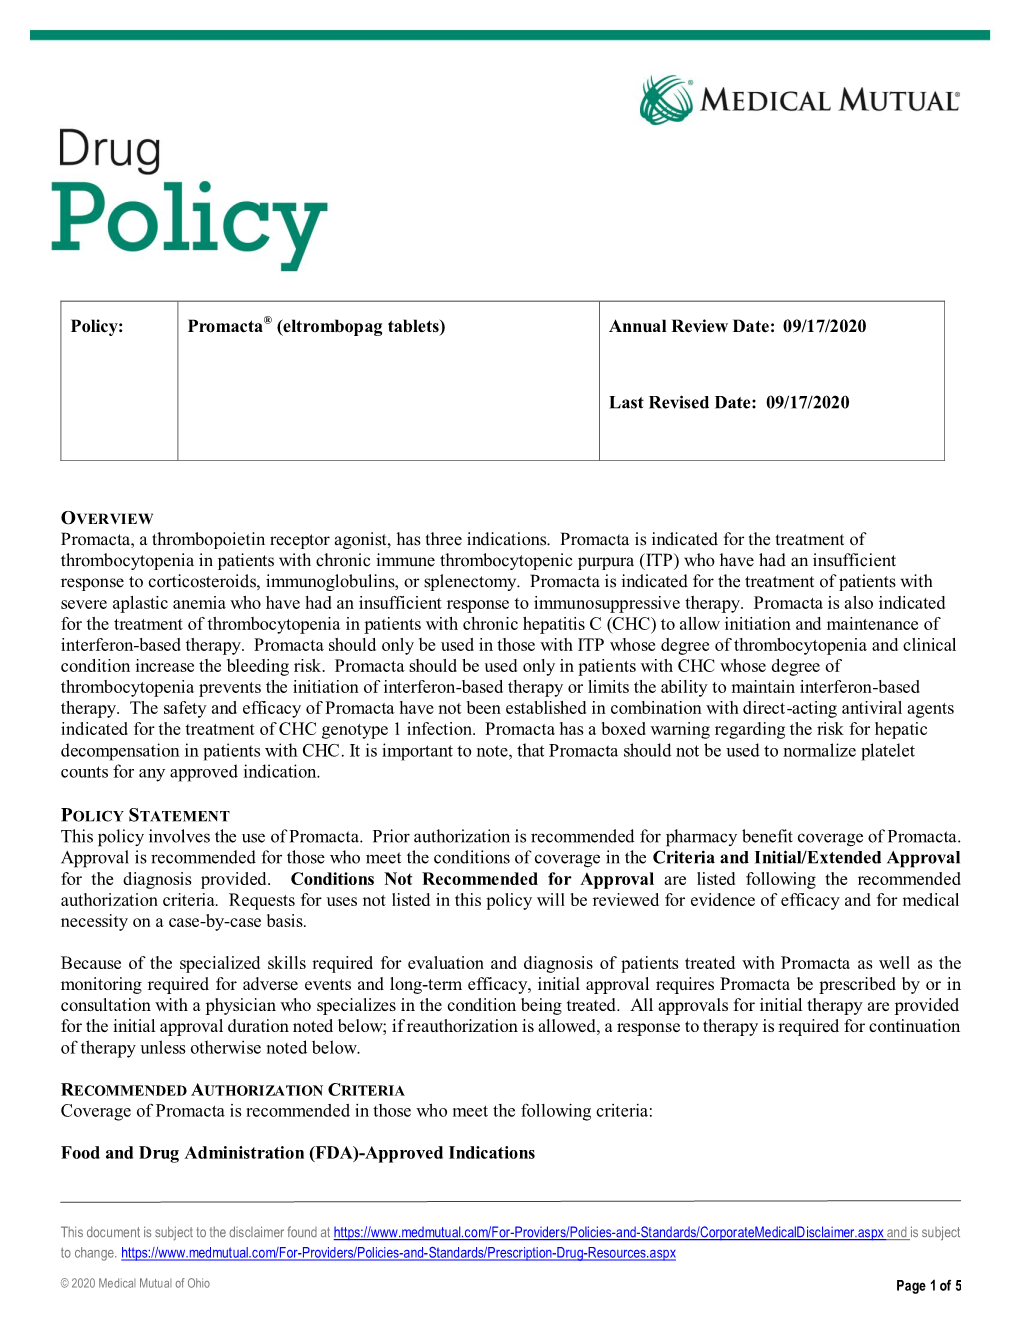 Policy: Promacta® (Eltrombopag Tablets) Annual Review Date: 09/17/2020